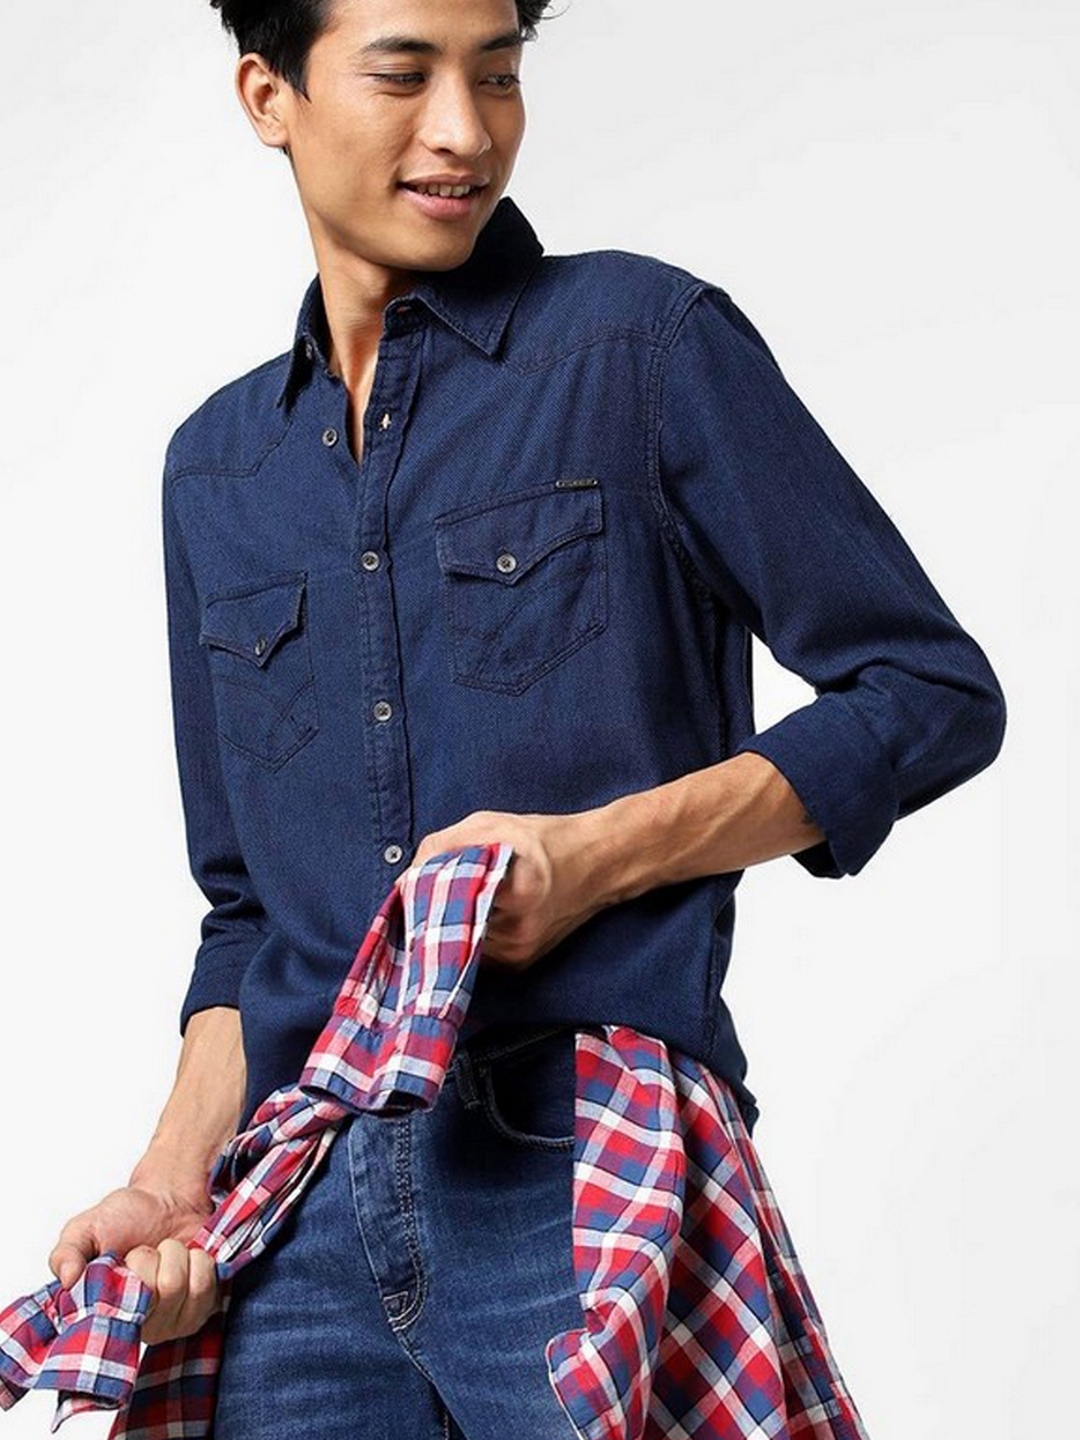 Double Pocket Printed Dark Blue Denim Shirt in Bangalore at best price by  Kef Clothing  Justdial